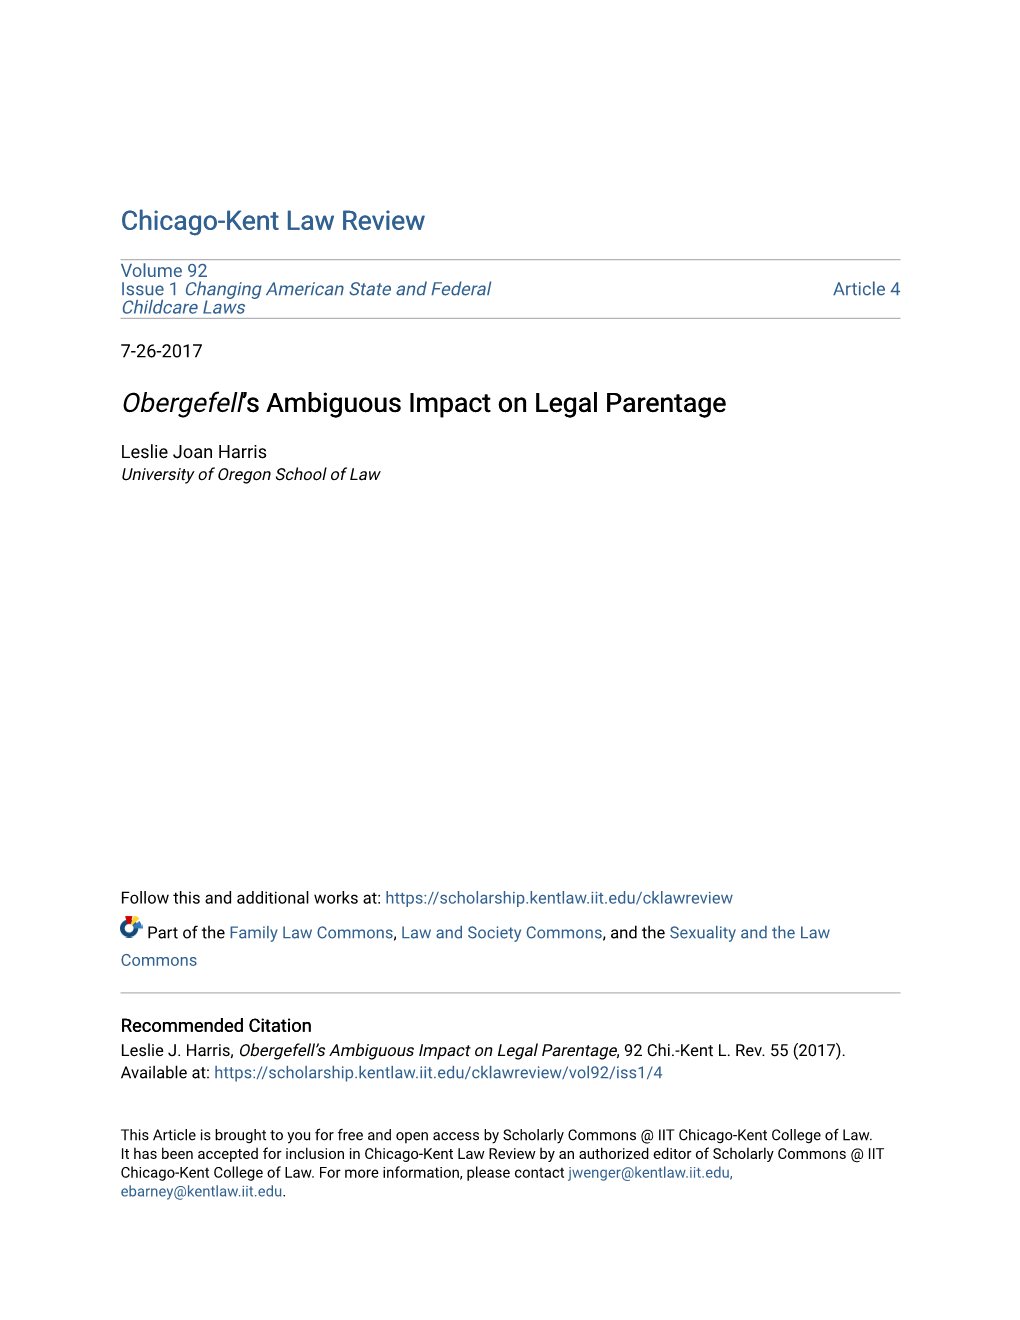 Obergefell's Ambiguous Impact on Legal Parentage